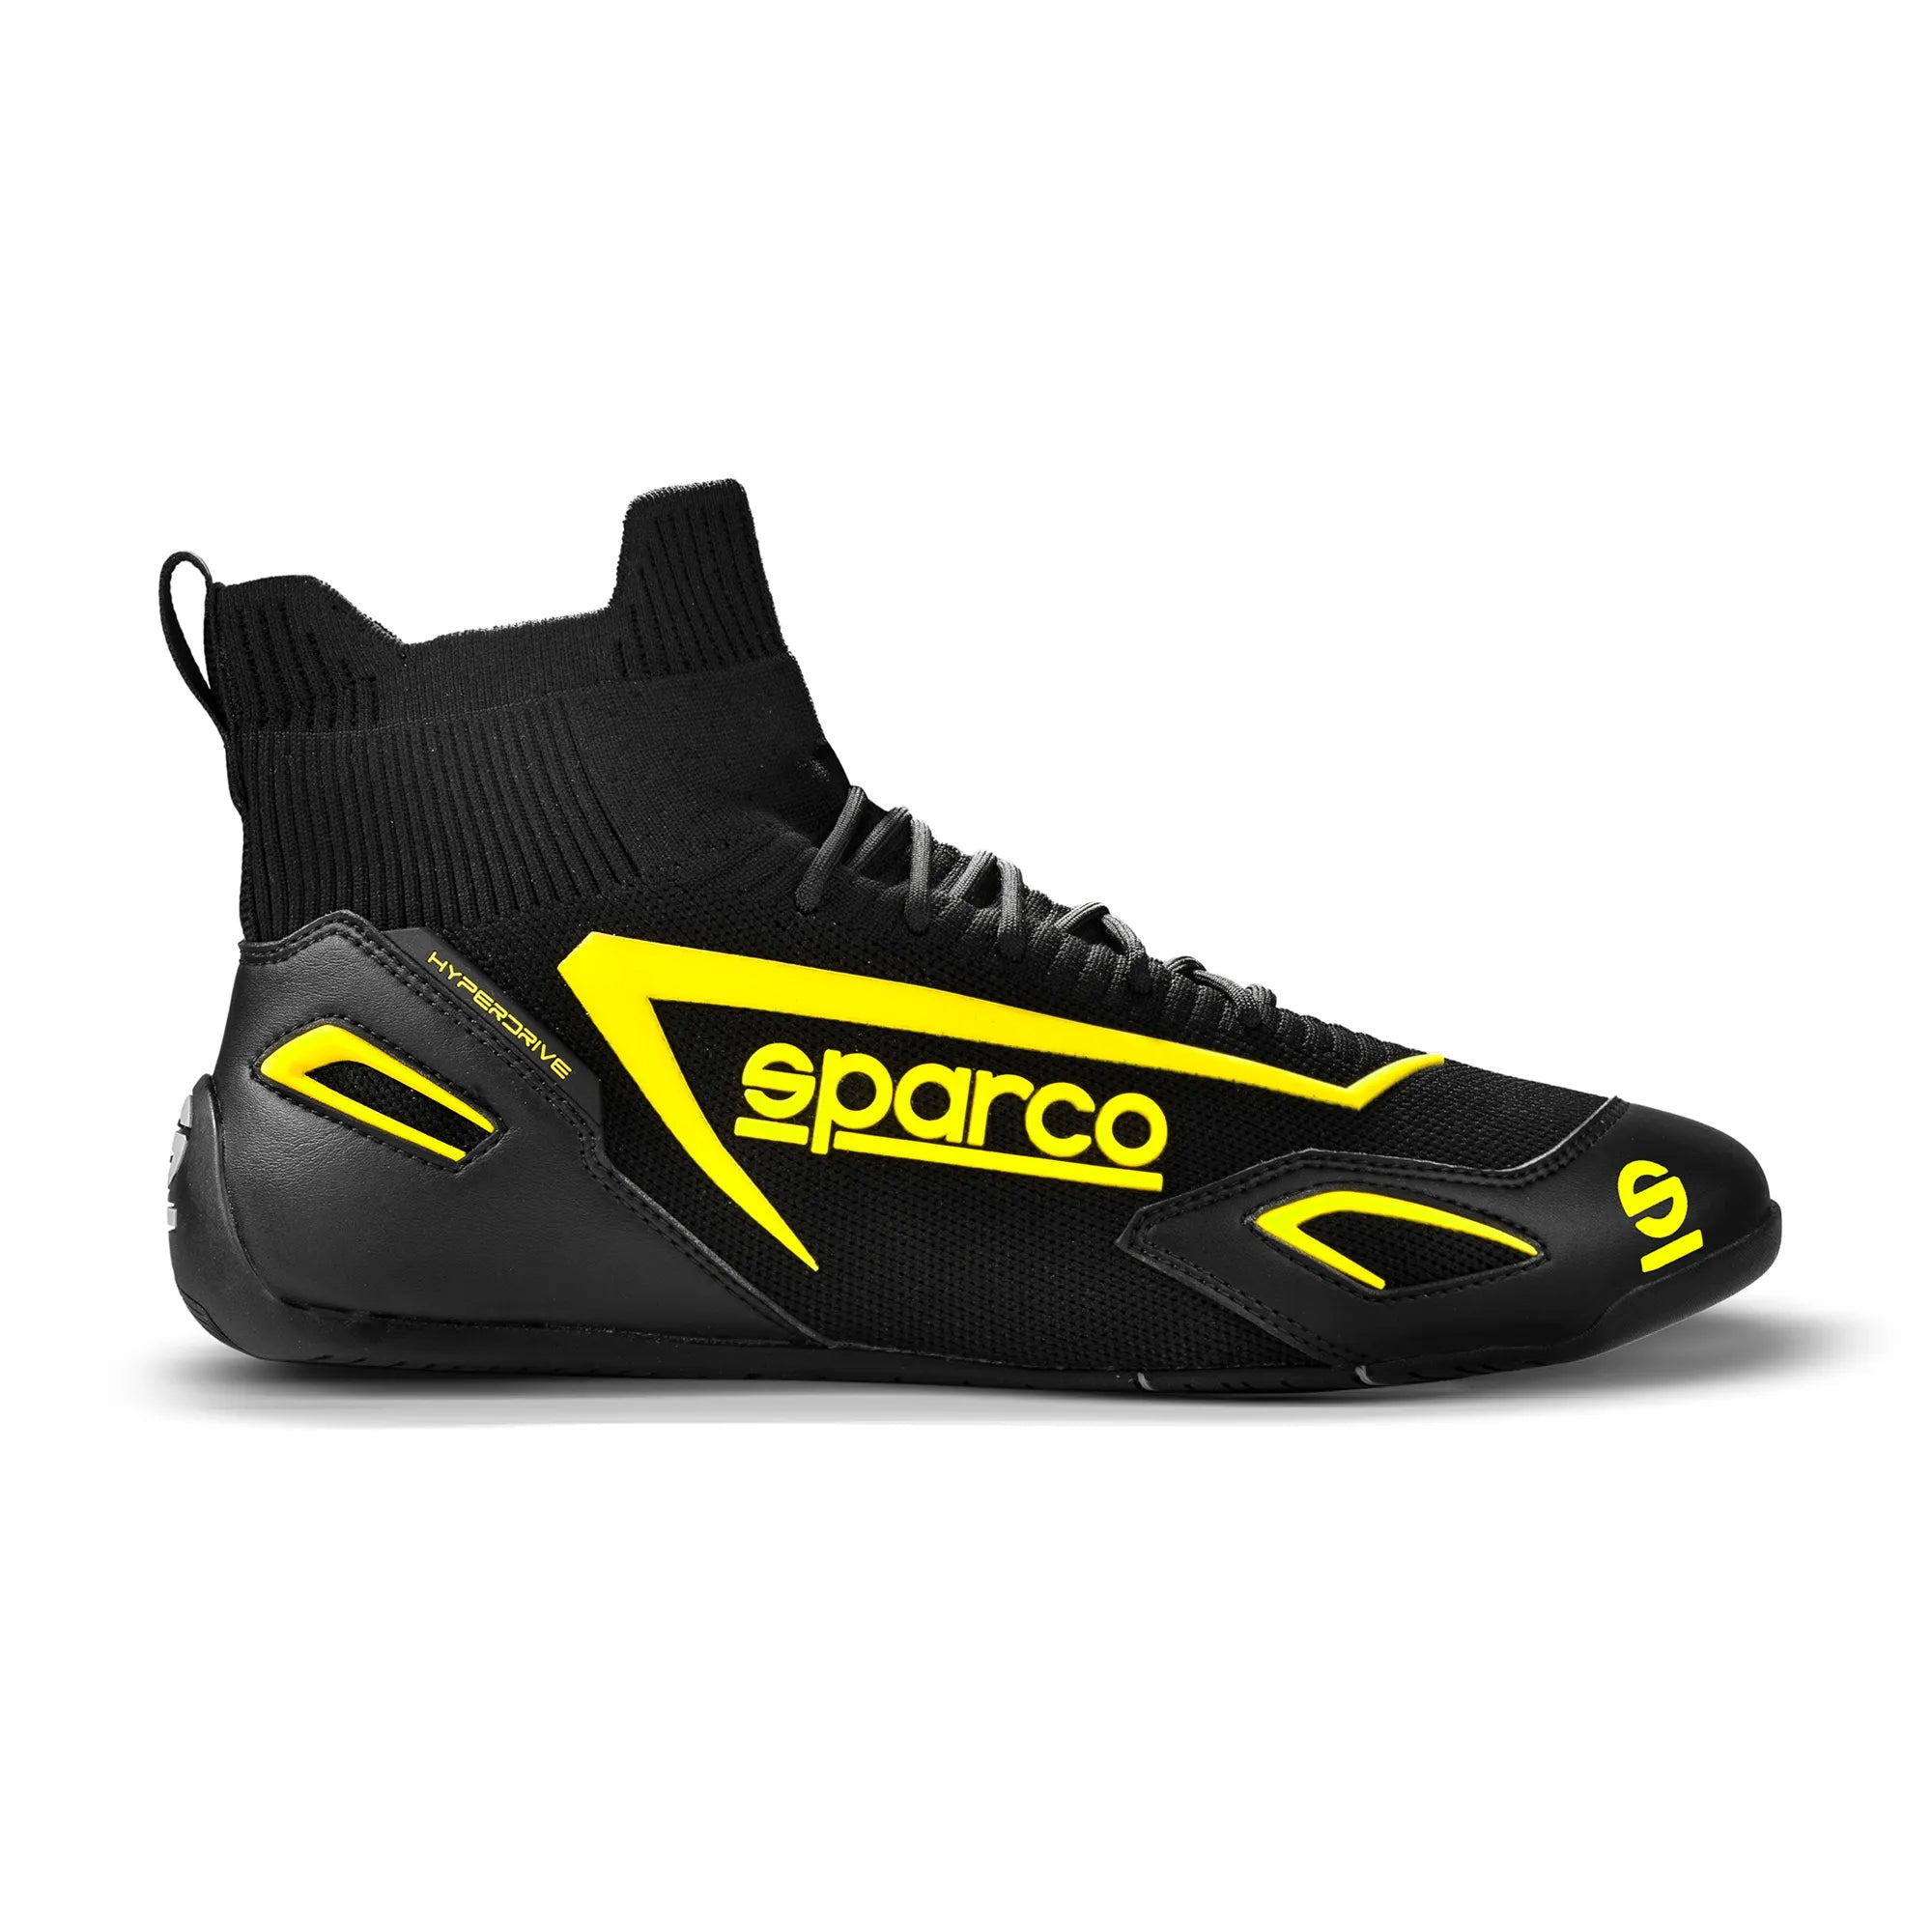 SPARCO 00129342NRGF Gaming sim racing shoes HYPERDRIVE, black/yellow, size 42 Photo-0 